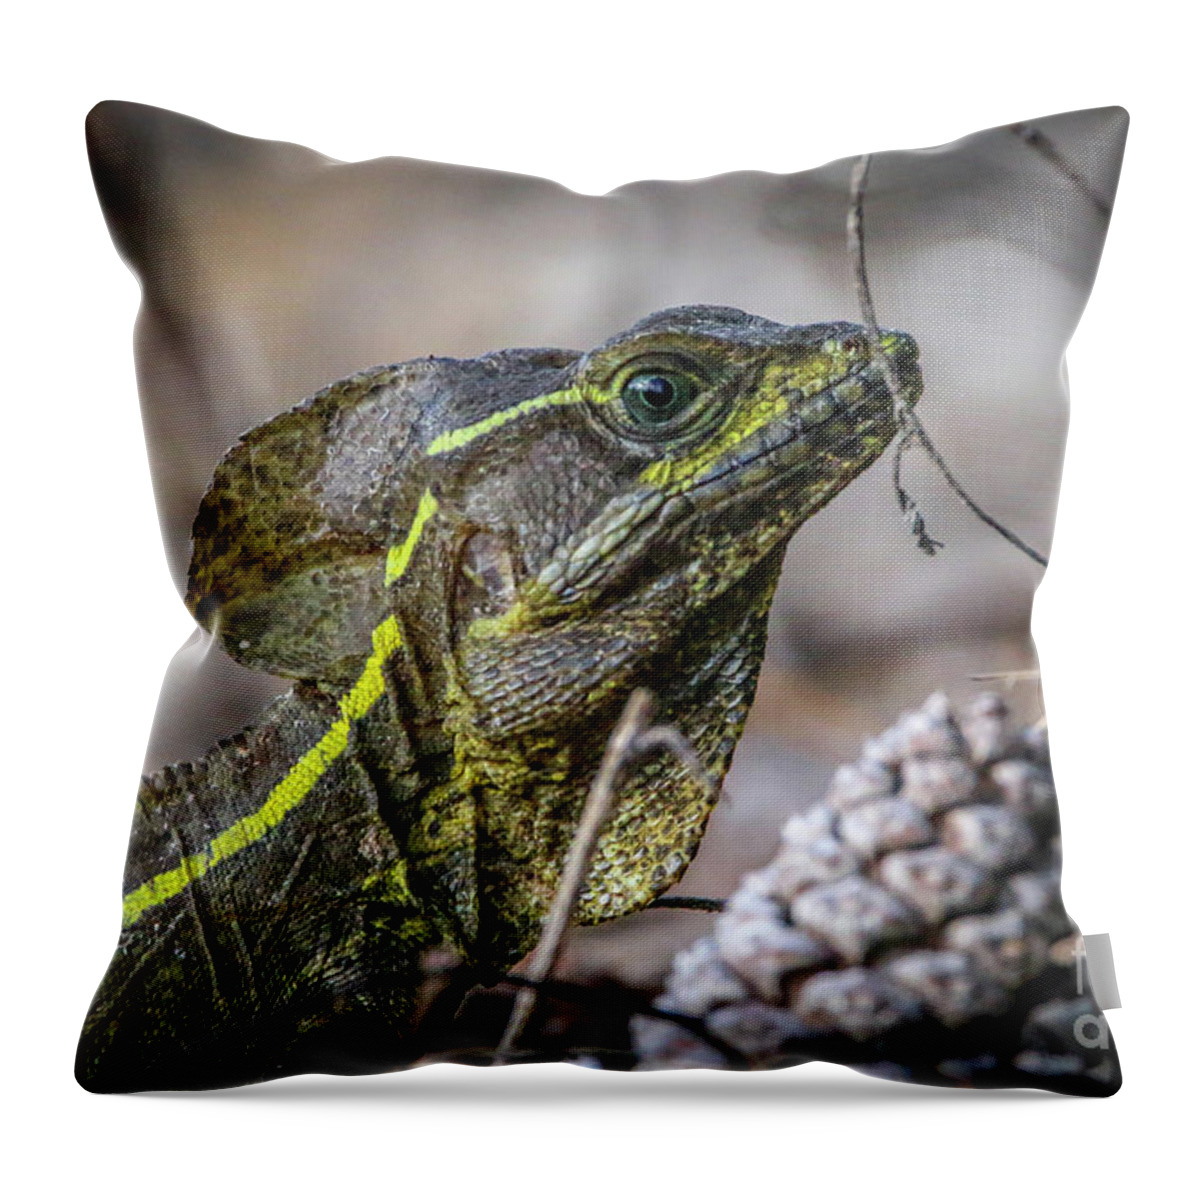 Basilisk Throw Pillow featuring the photograph Jesus Lizard #2 by Tom Claud